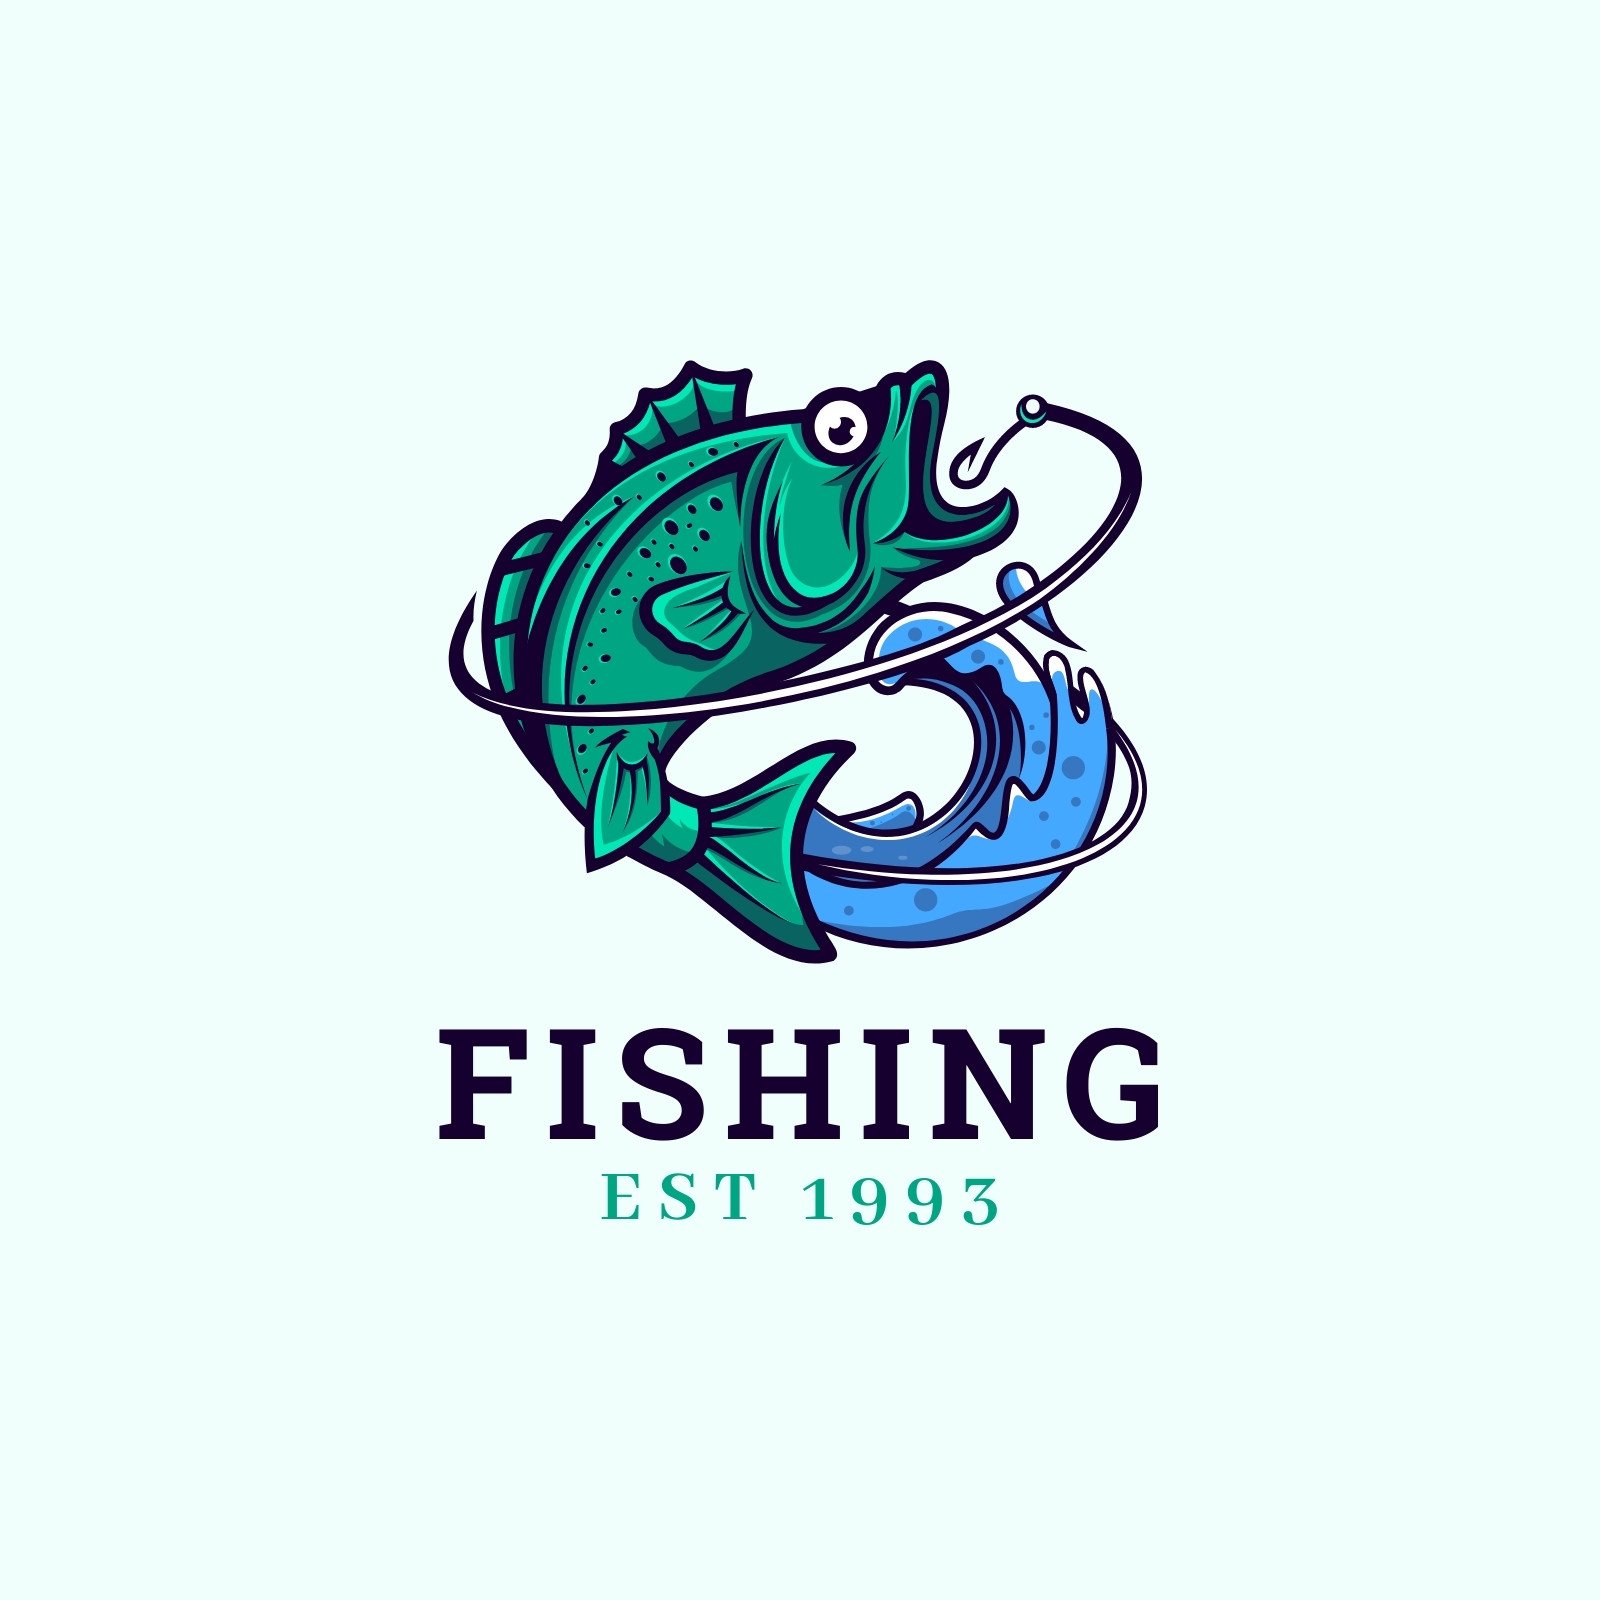 Fishing Tee Projects :: Photos, videos, logos, illustrations and